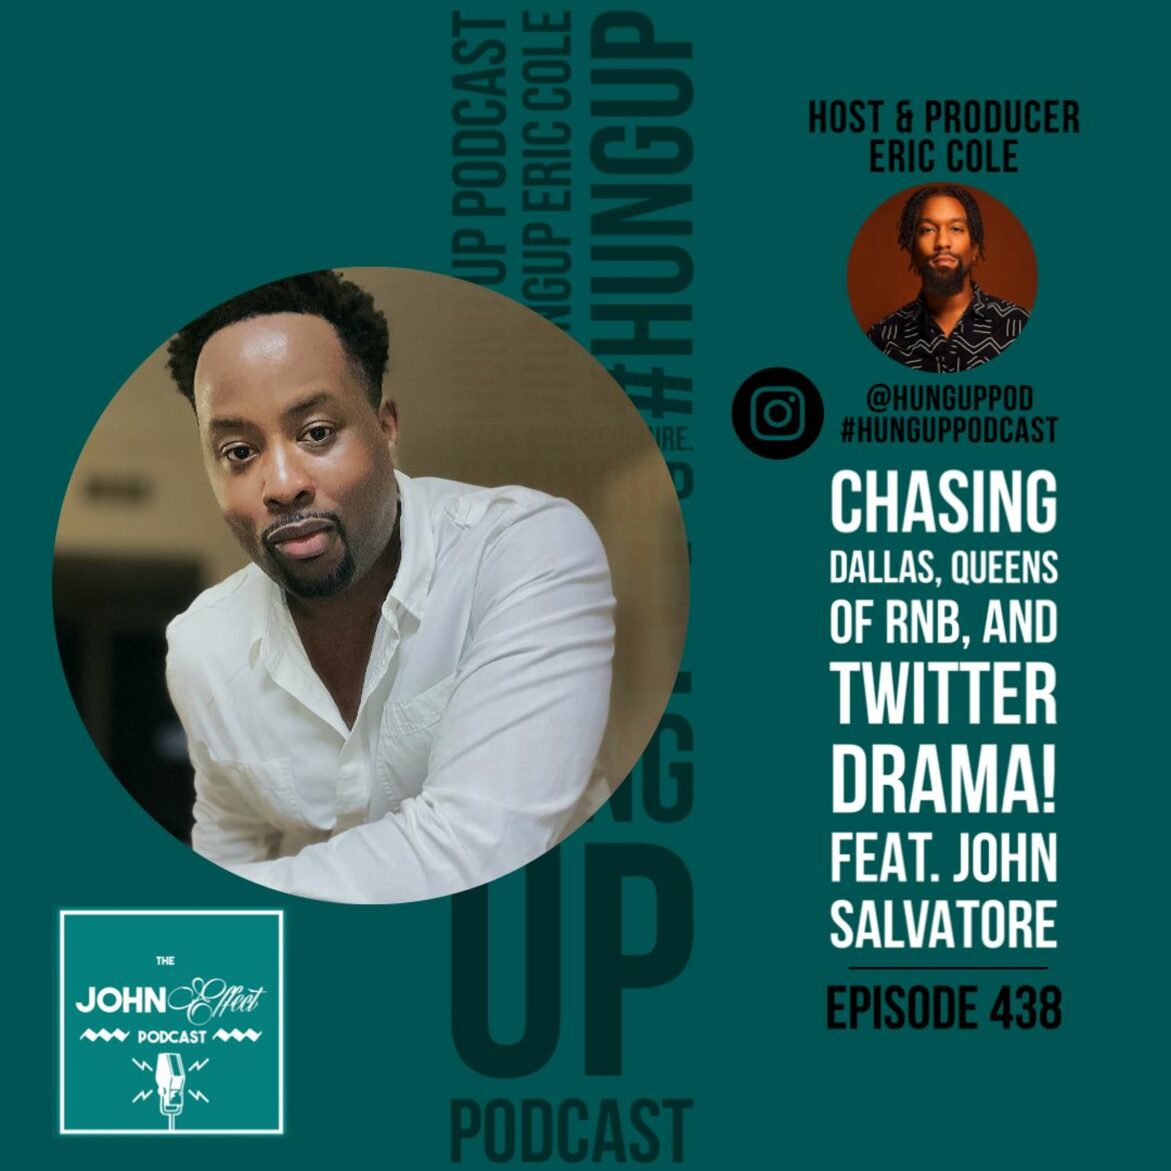 Black Podcasting - Episode 438: Chasing Dallas, Queens of RNB, and Twitter Drama! Feat. John Salvatore